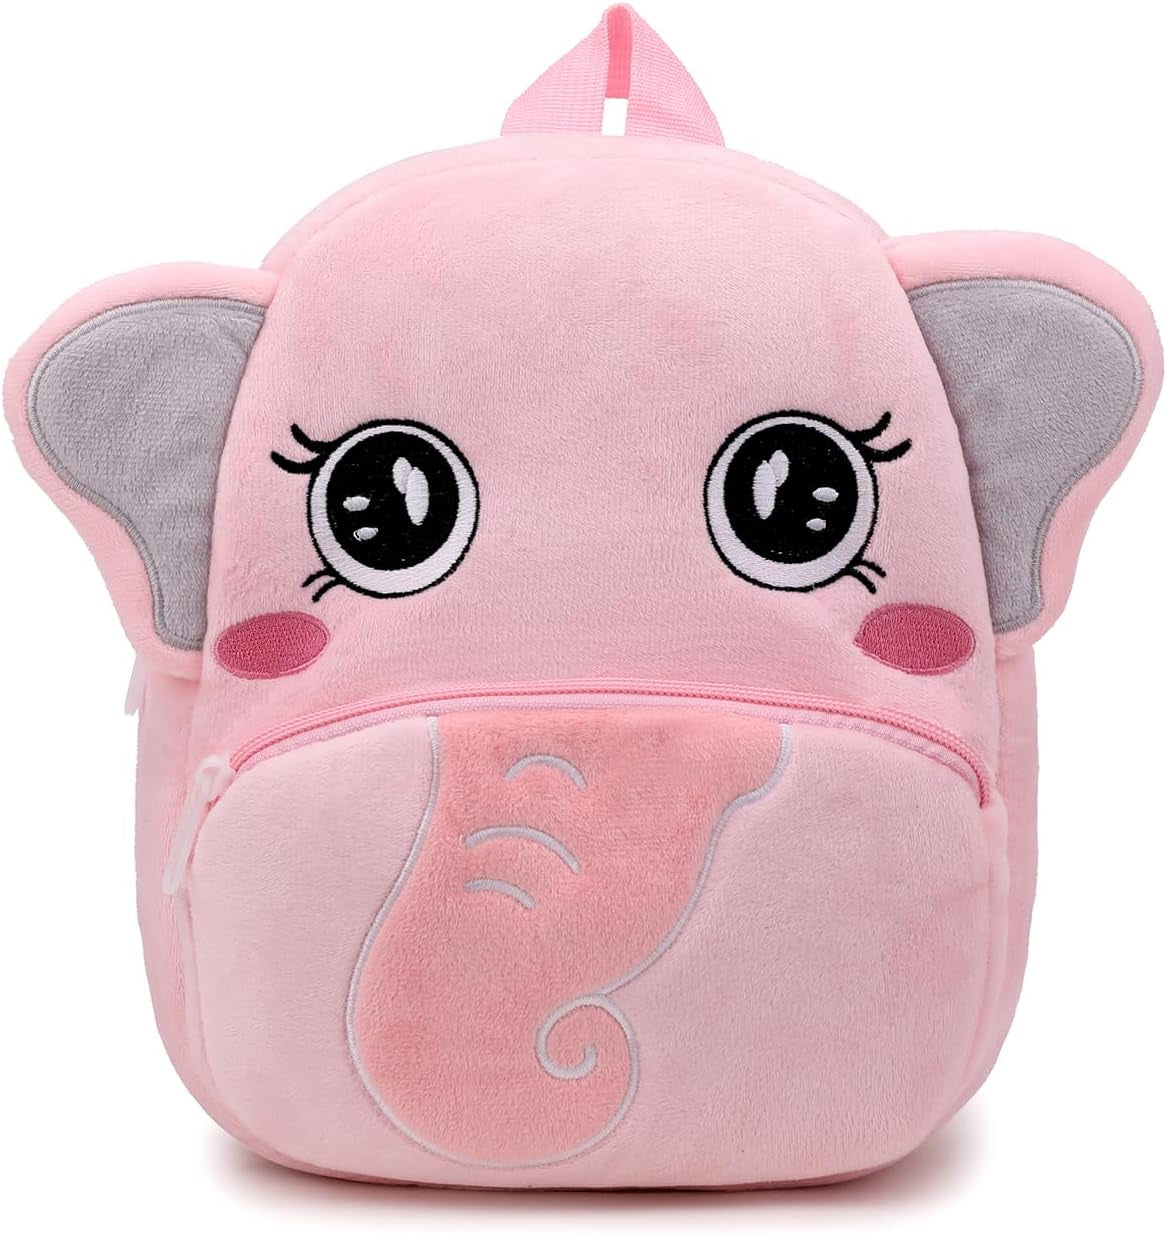 Toddler Backpack for Boys and Girls, Cute Soft Plush Animal Cartoon Mini Backpack Little for Kids 2-6 Years (Elephent Pink)